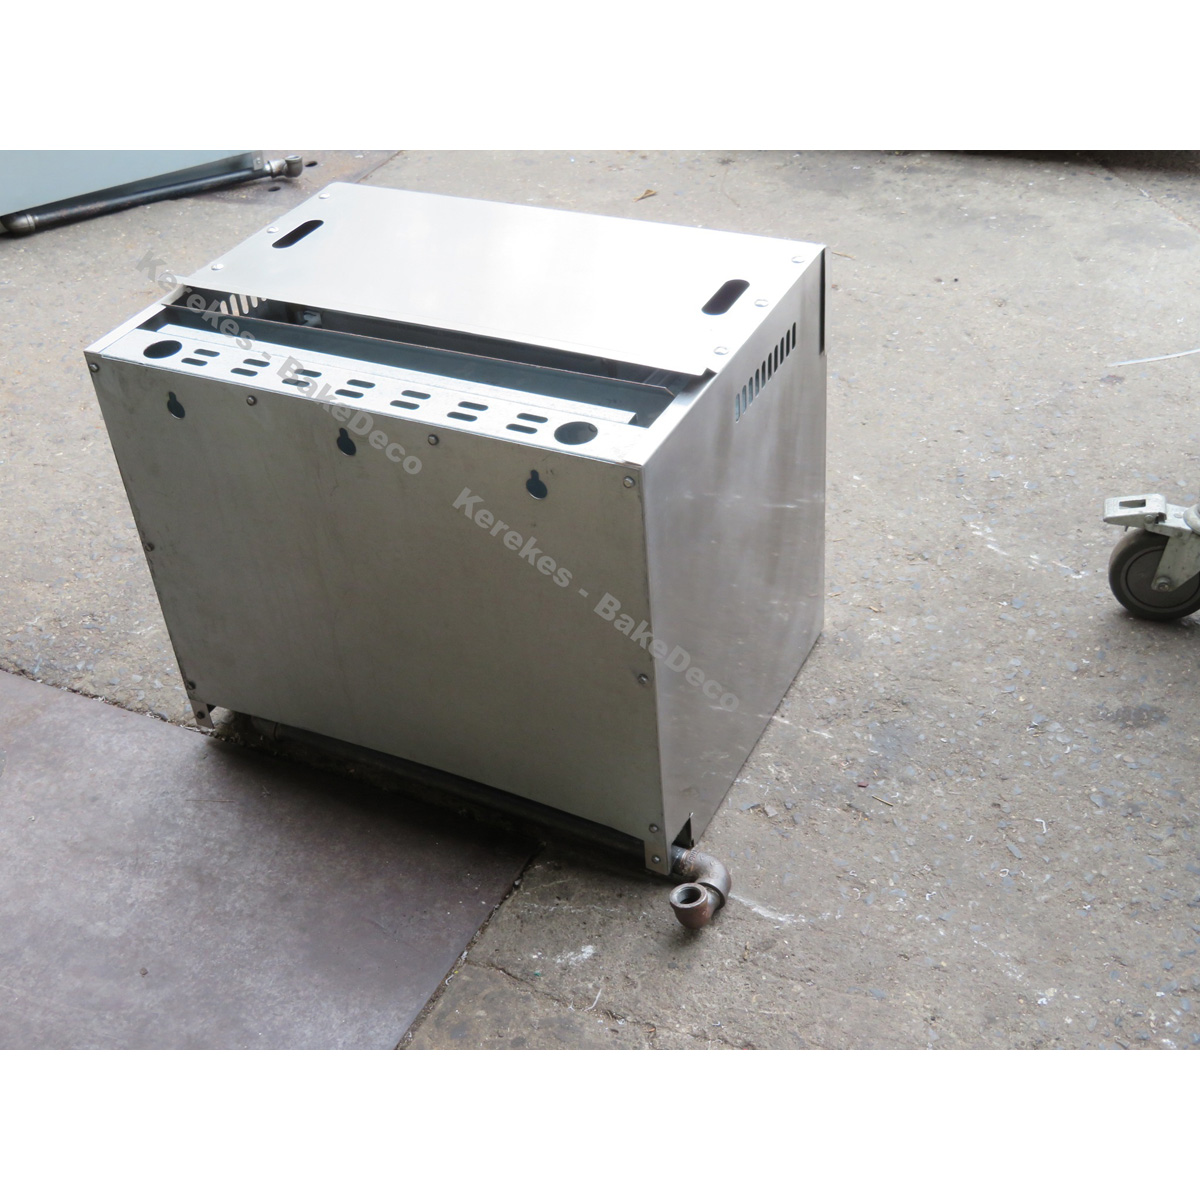 Asber Cheese Melter AECM-24-NG, Used Very Good Condition image 1